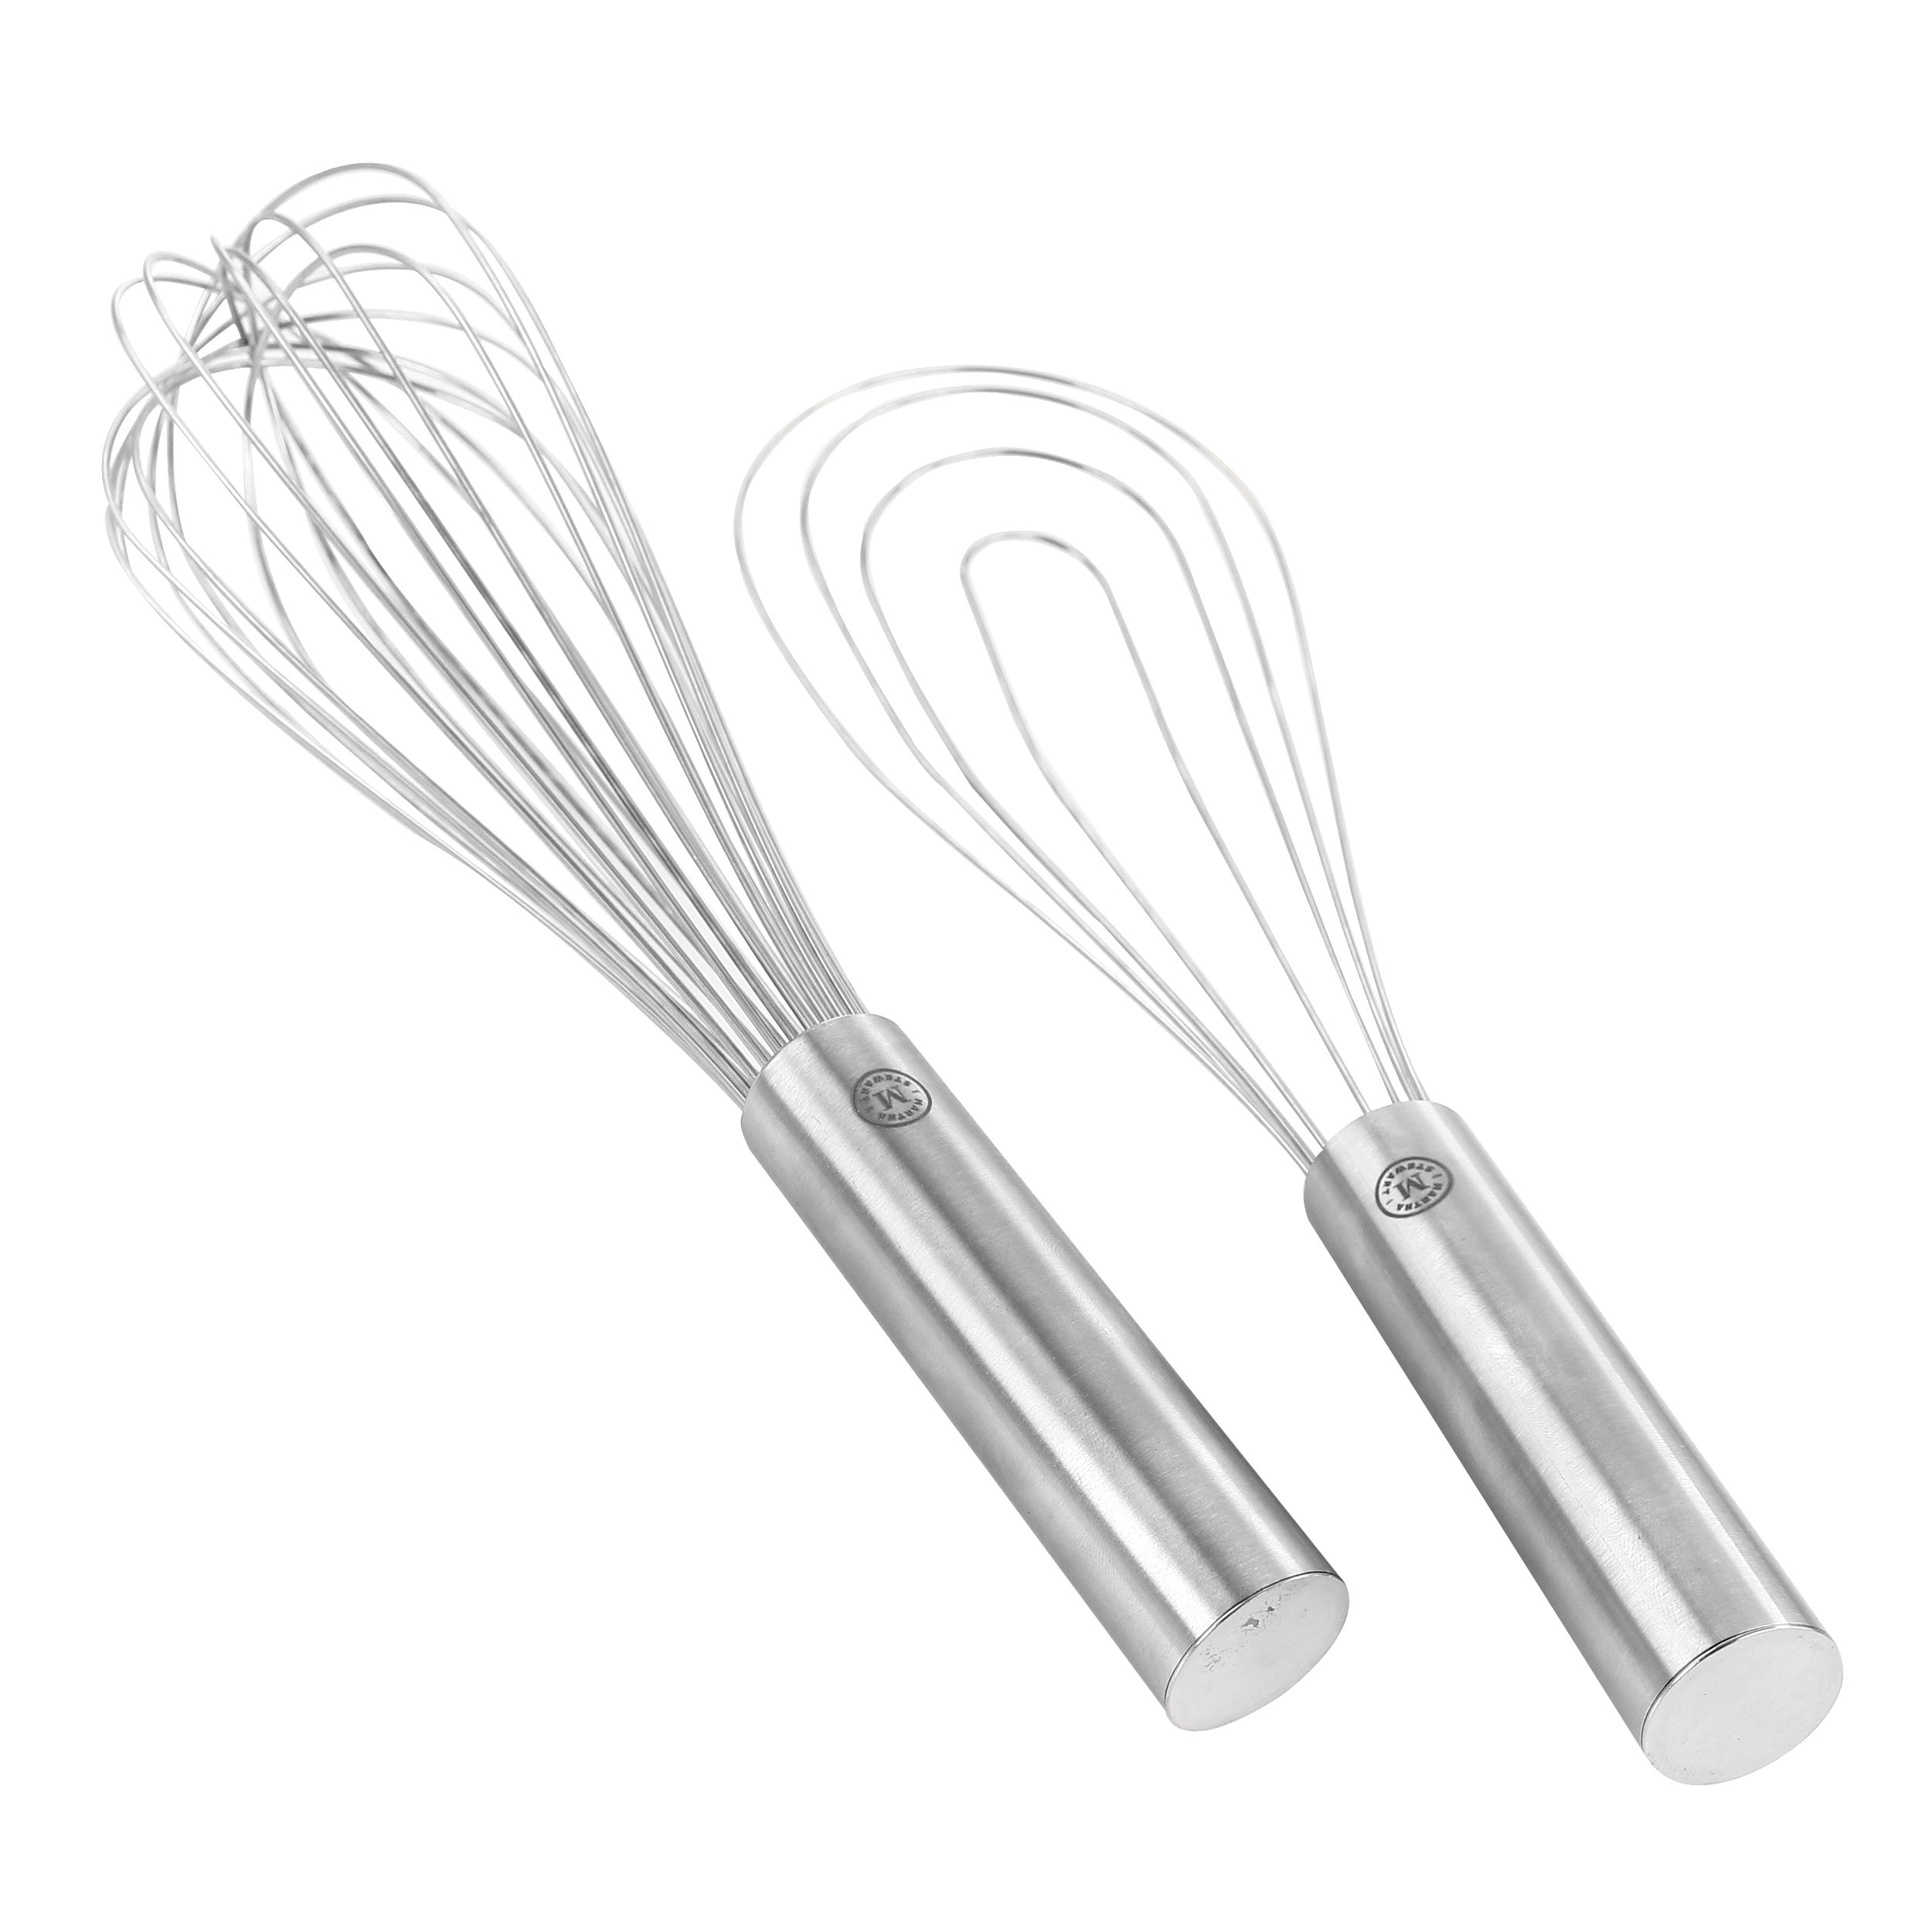 Martha Stewart Stainless Steel 2-pc. Tongs Set, Color: St Steel